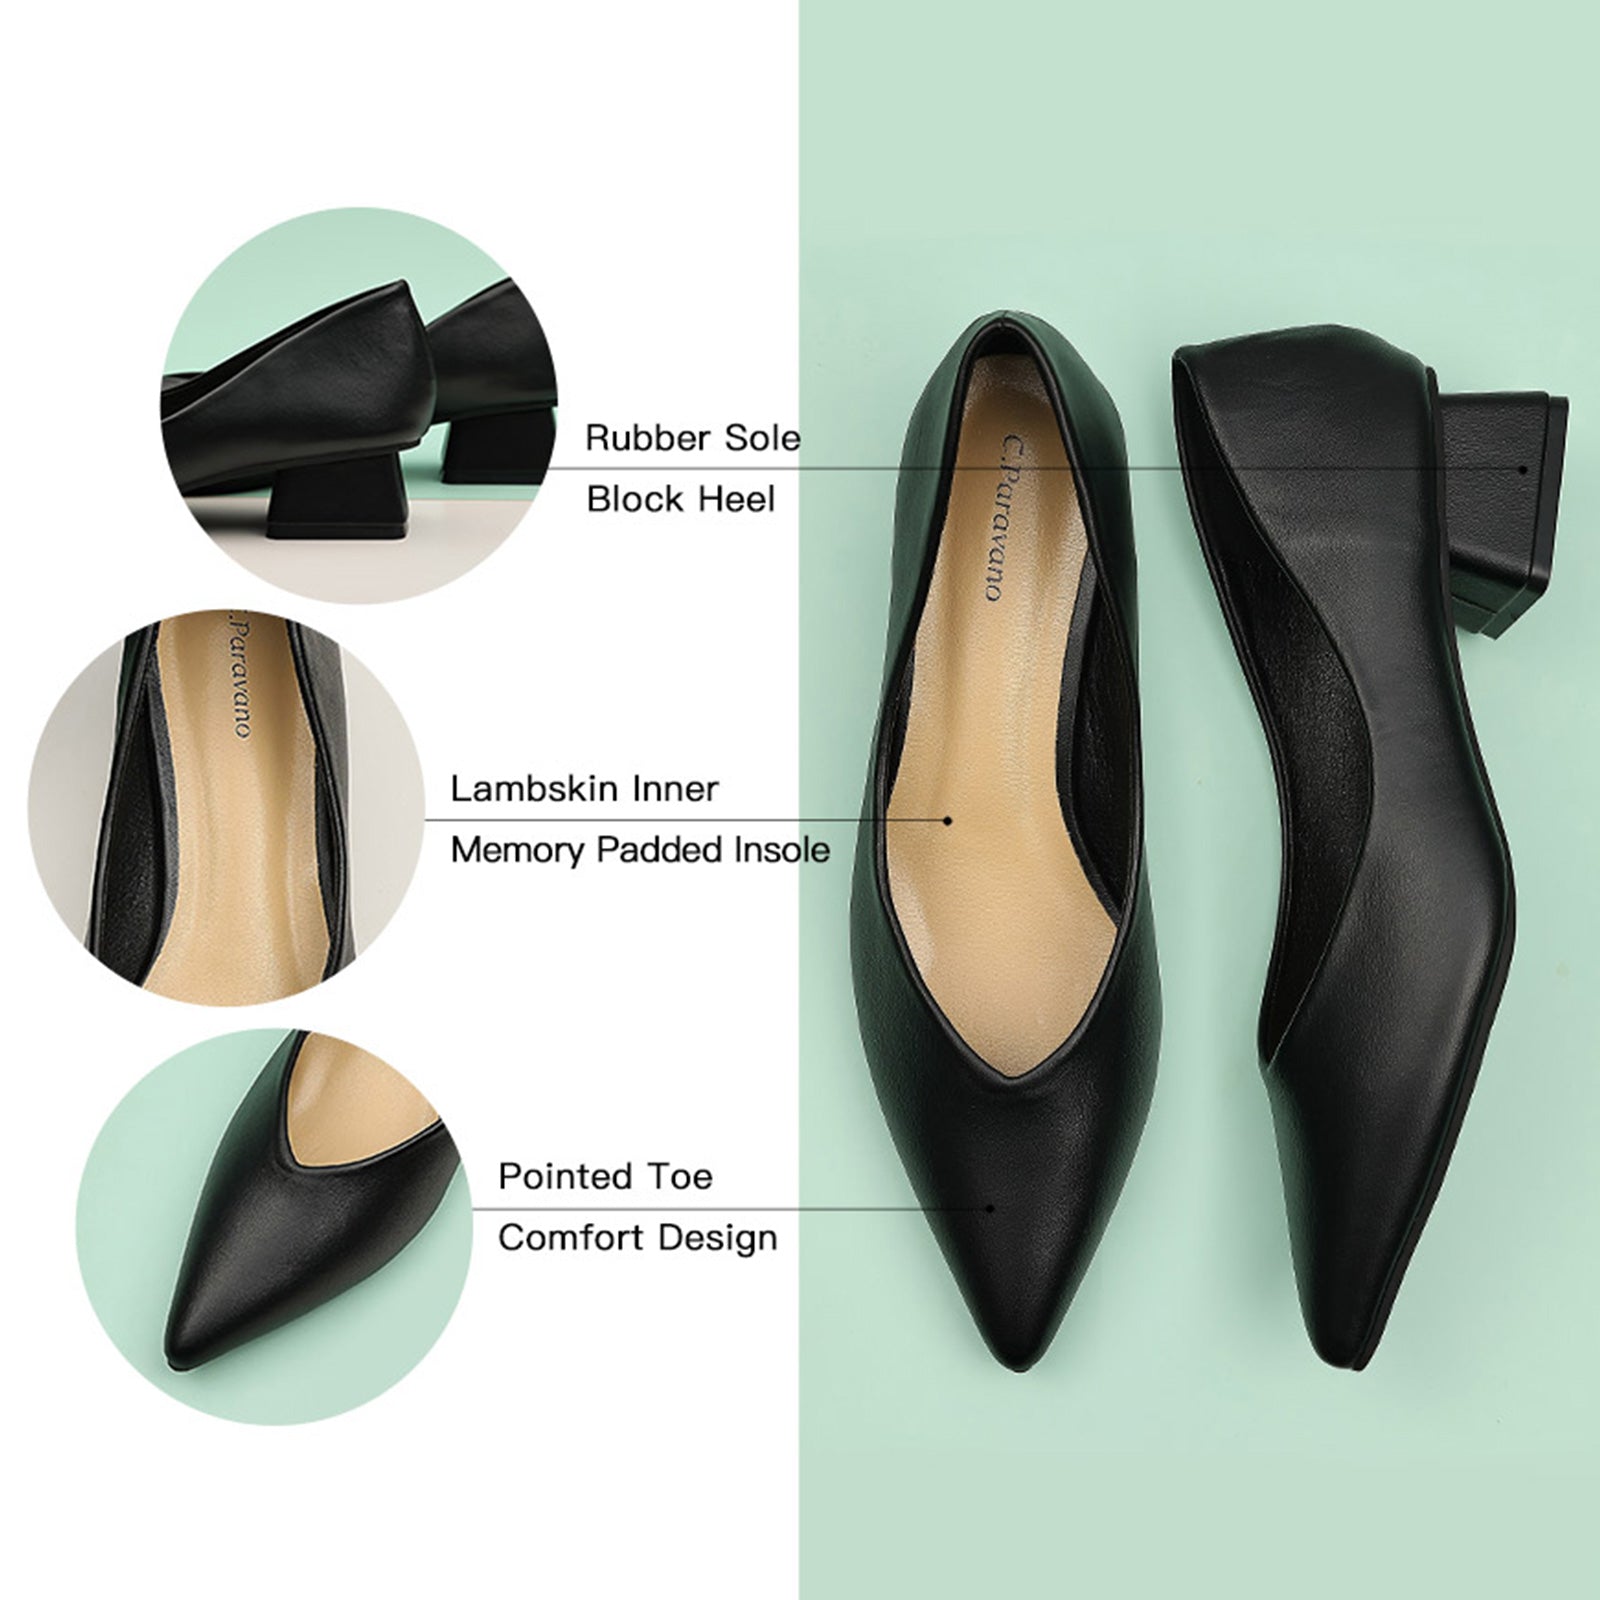 Embrace classic and fresh style with these black block heel pumps, featuring a timeless design for a polished and versatile look